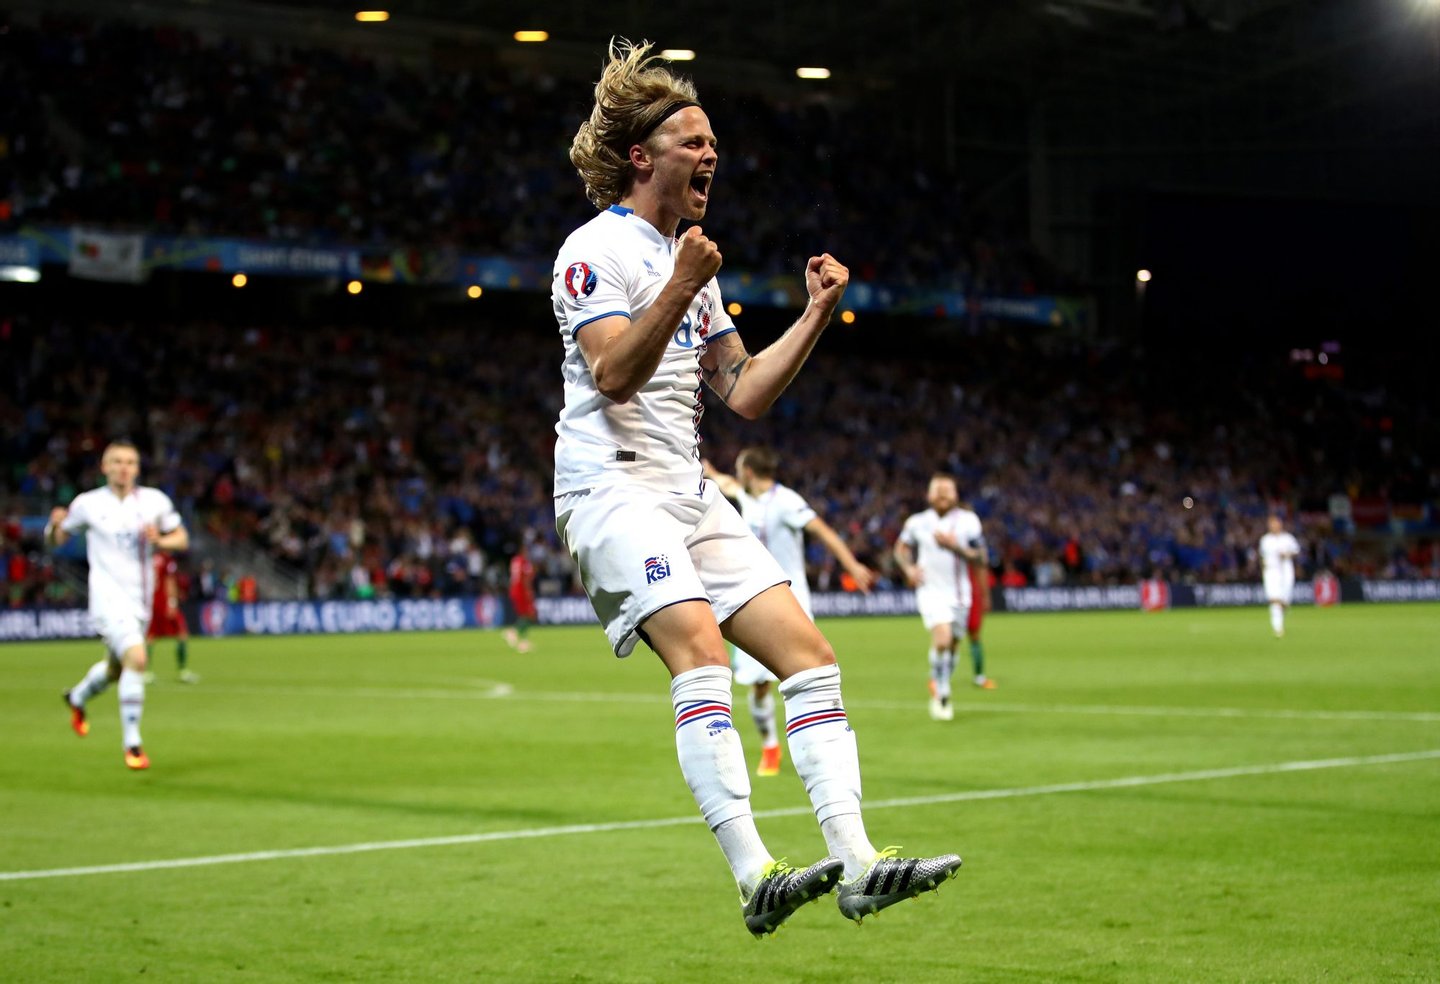 SAINT-ETIENNE, FRANCE - JUNE 14: Birkir Bjarnason of Iceland celebrates scoring his team's first goal during the UEFA EURO 2016 Group F match between Portugal and Iceland at Stade Geoffroy-Guichard on June 14, 2016 in Saint-Etienne, France. (Photo by Clive Brunskill/Getty Images)